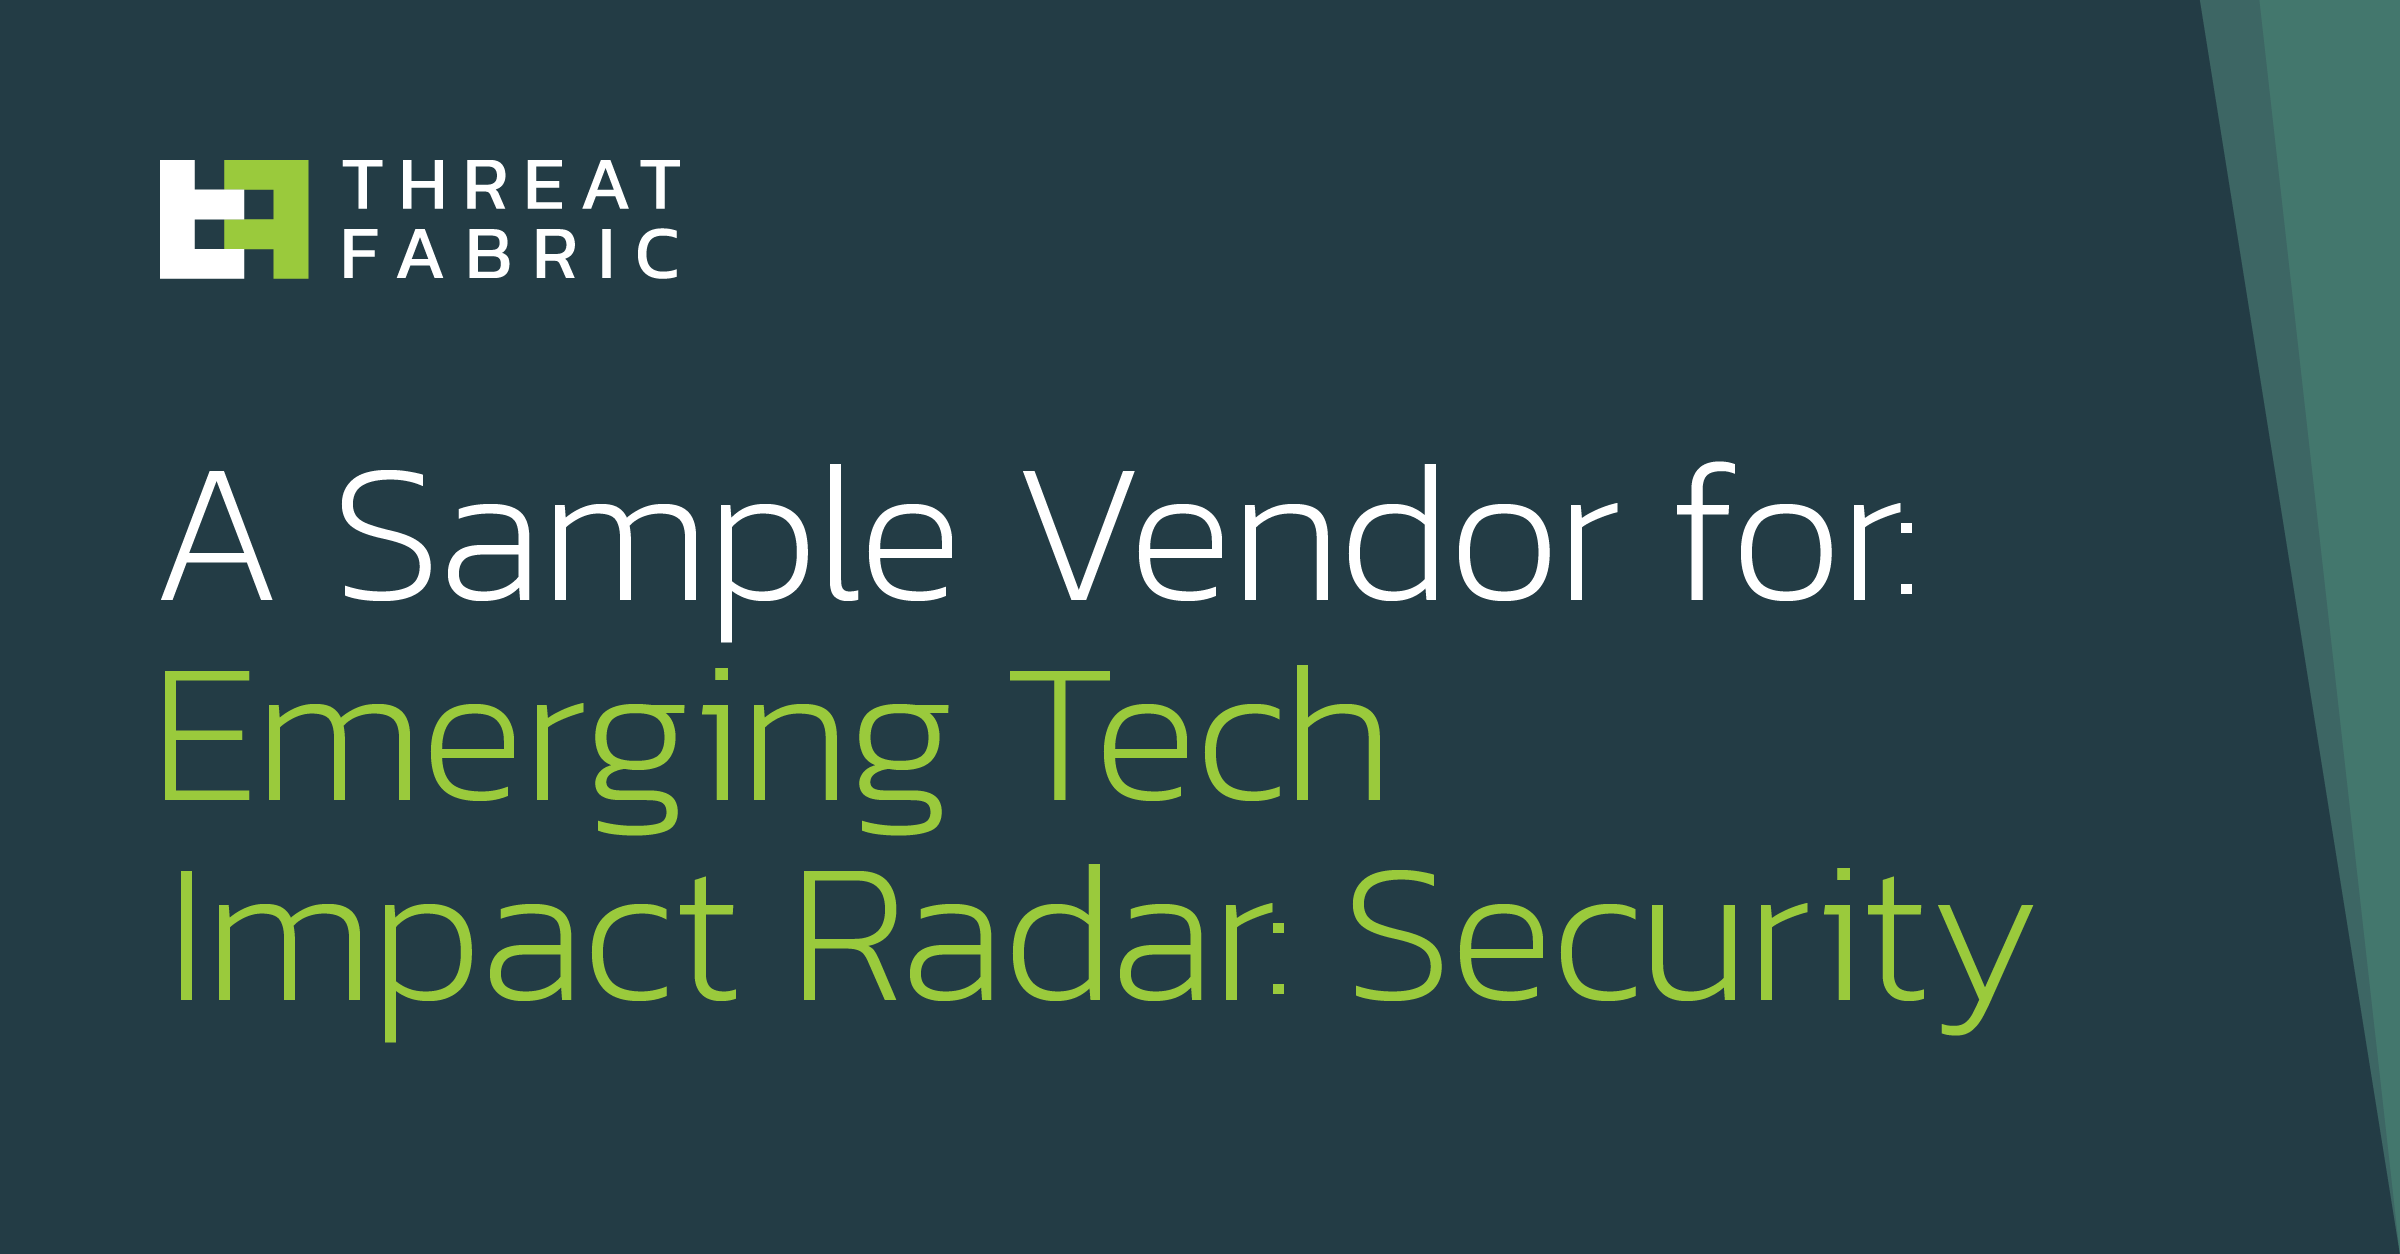 ThreatFabric Recognised by Gartner as a Sample Vendor for: Emerging Tech Impact Radar: Security